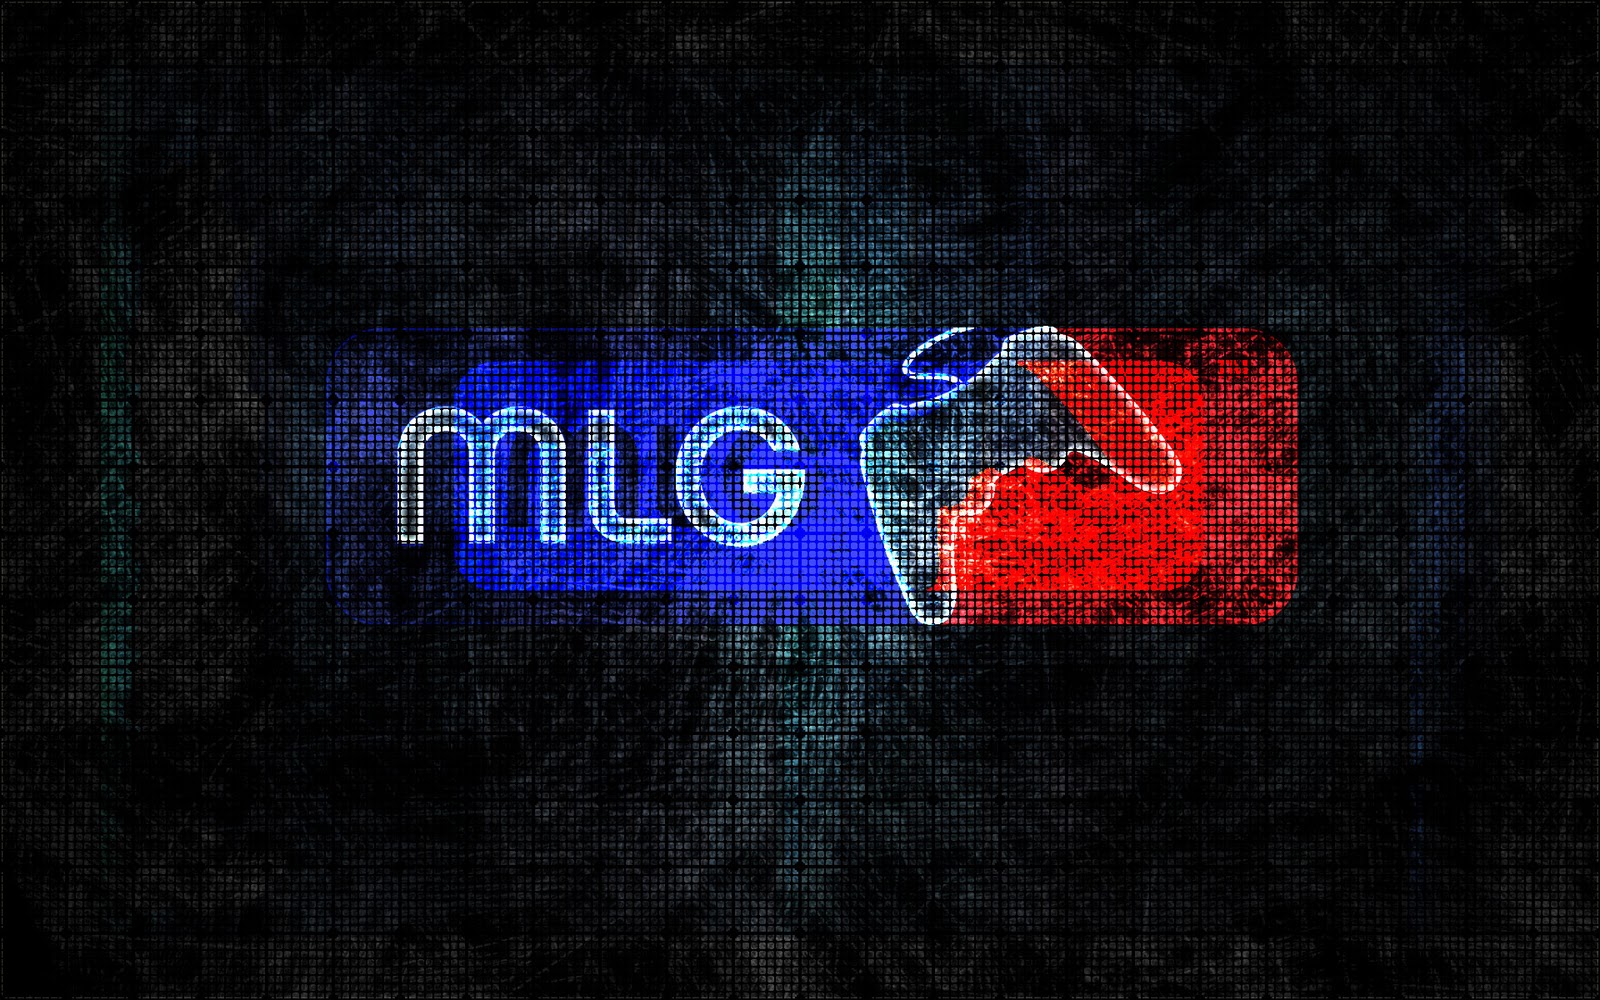 Starcraft Ii League More Wallpaper As Mlg Can